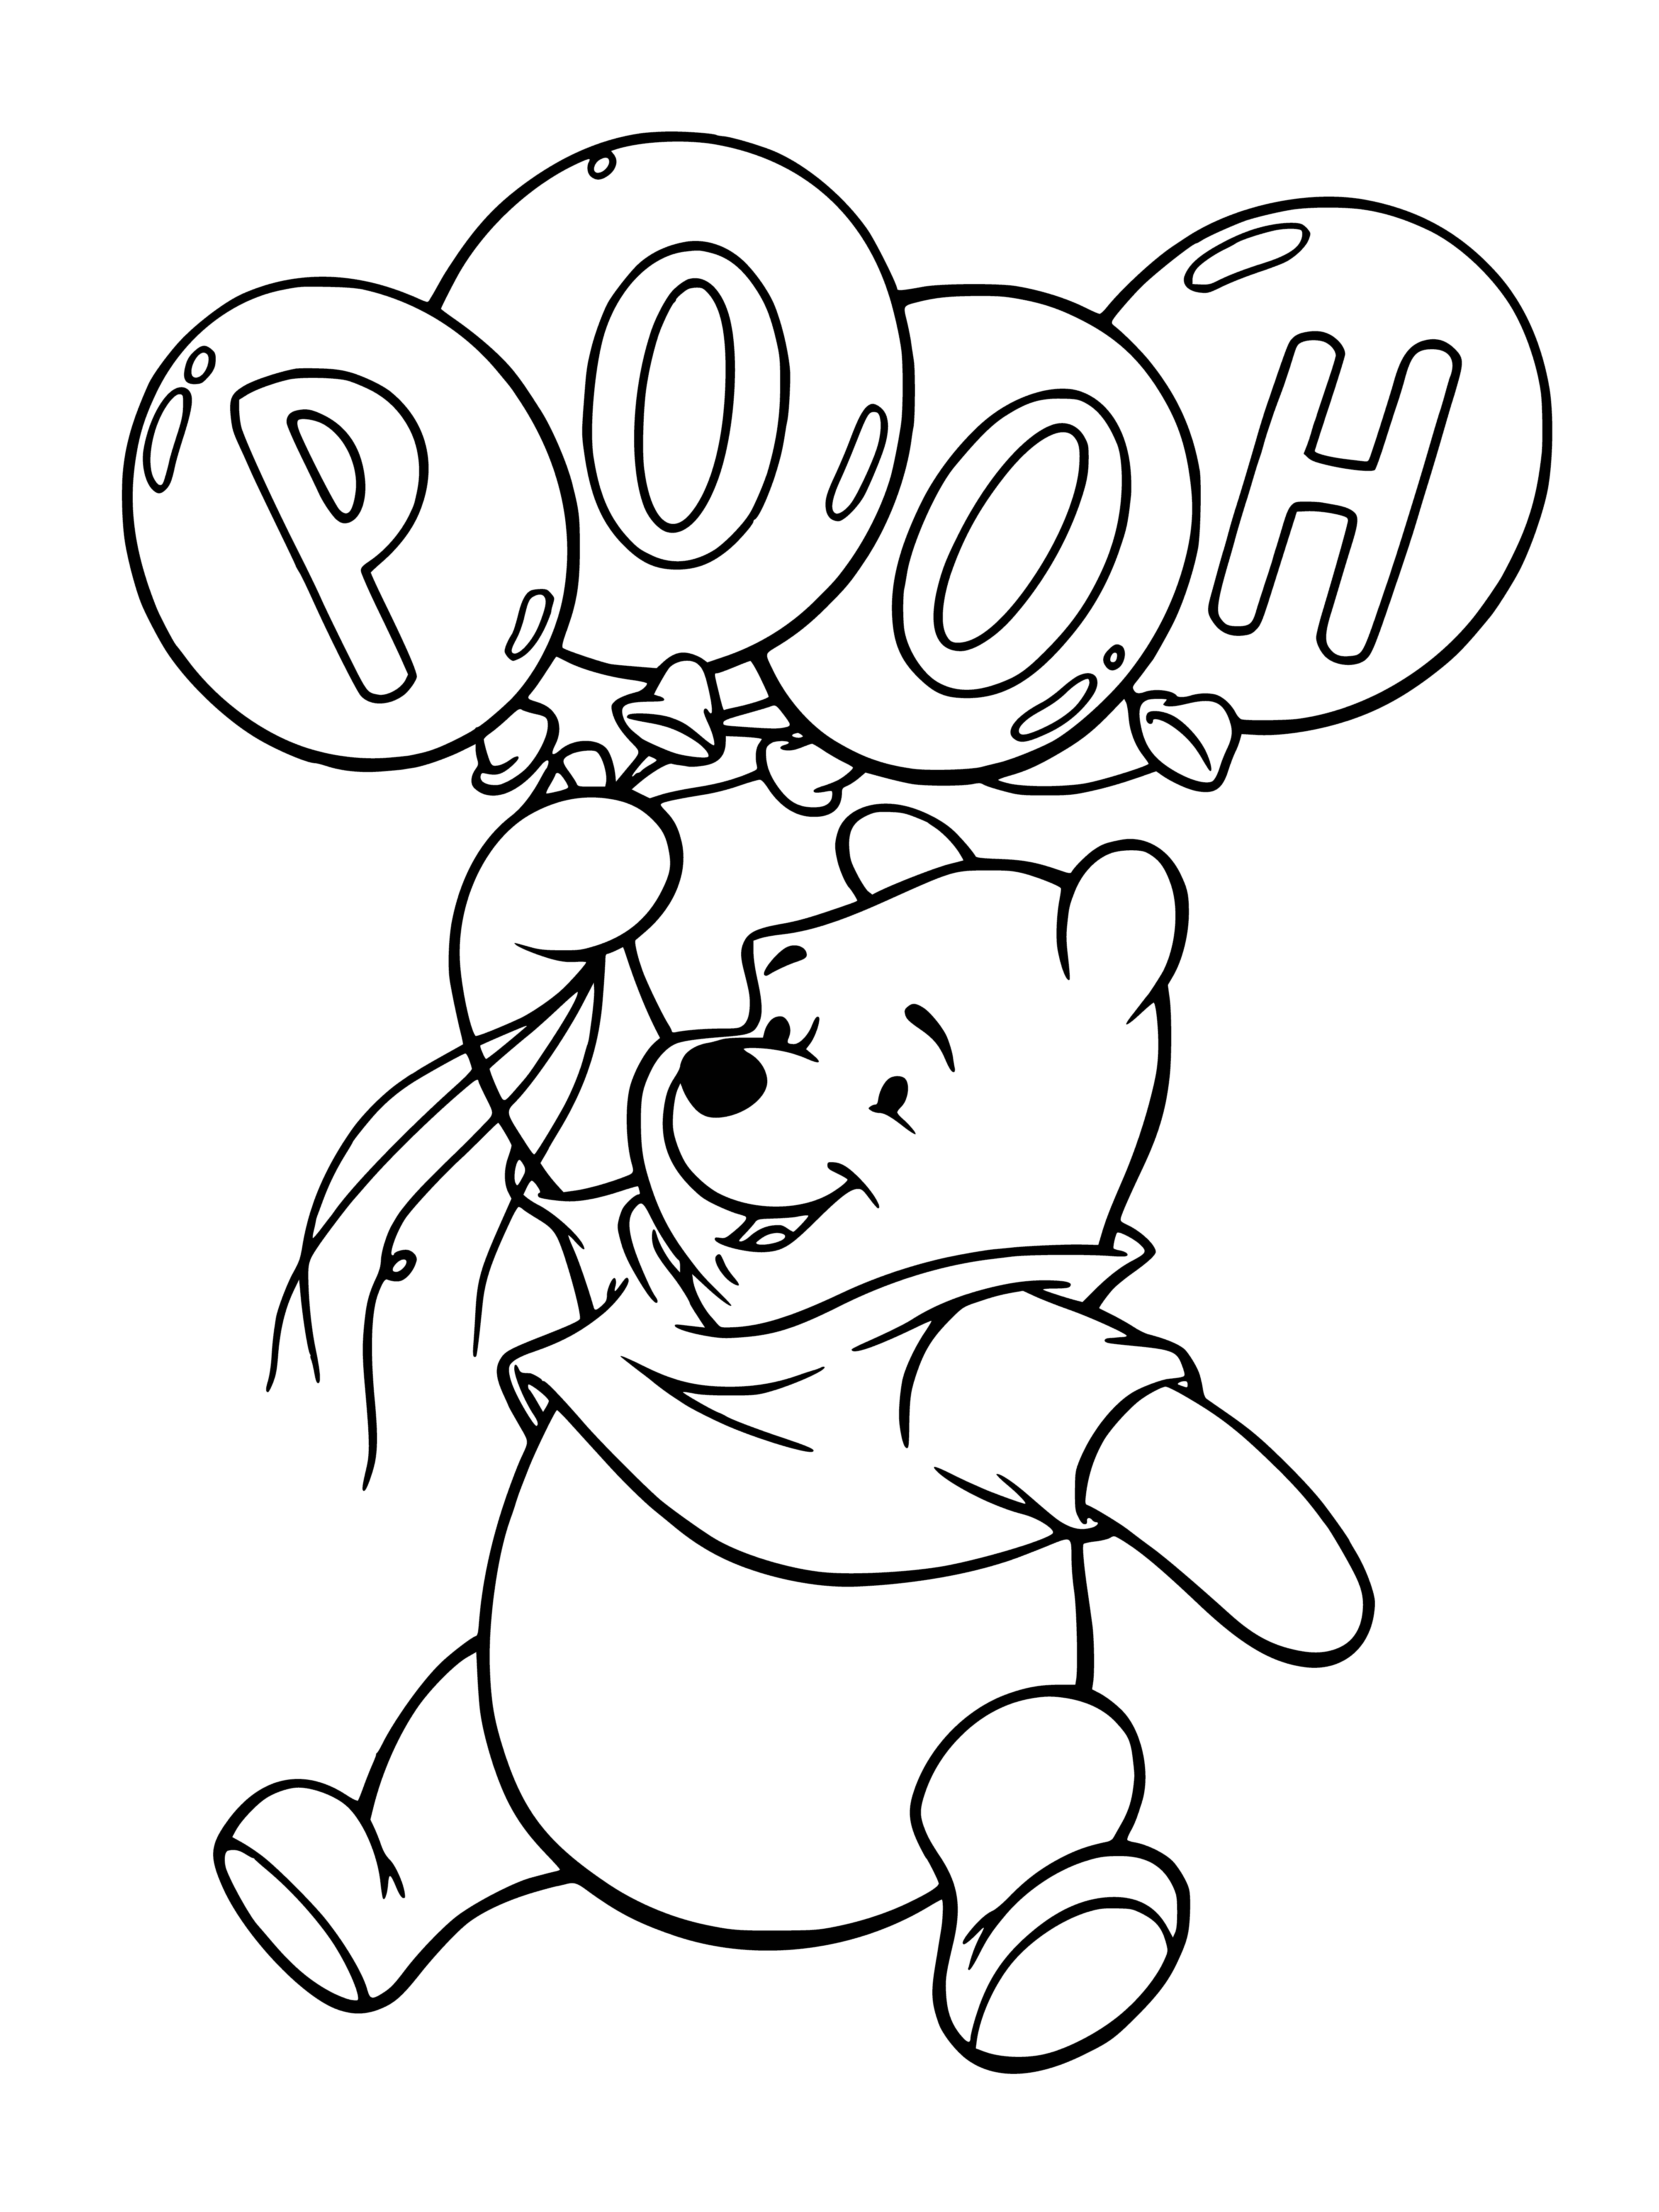 Winnie and the balloons coloring page